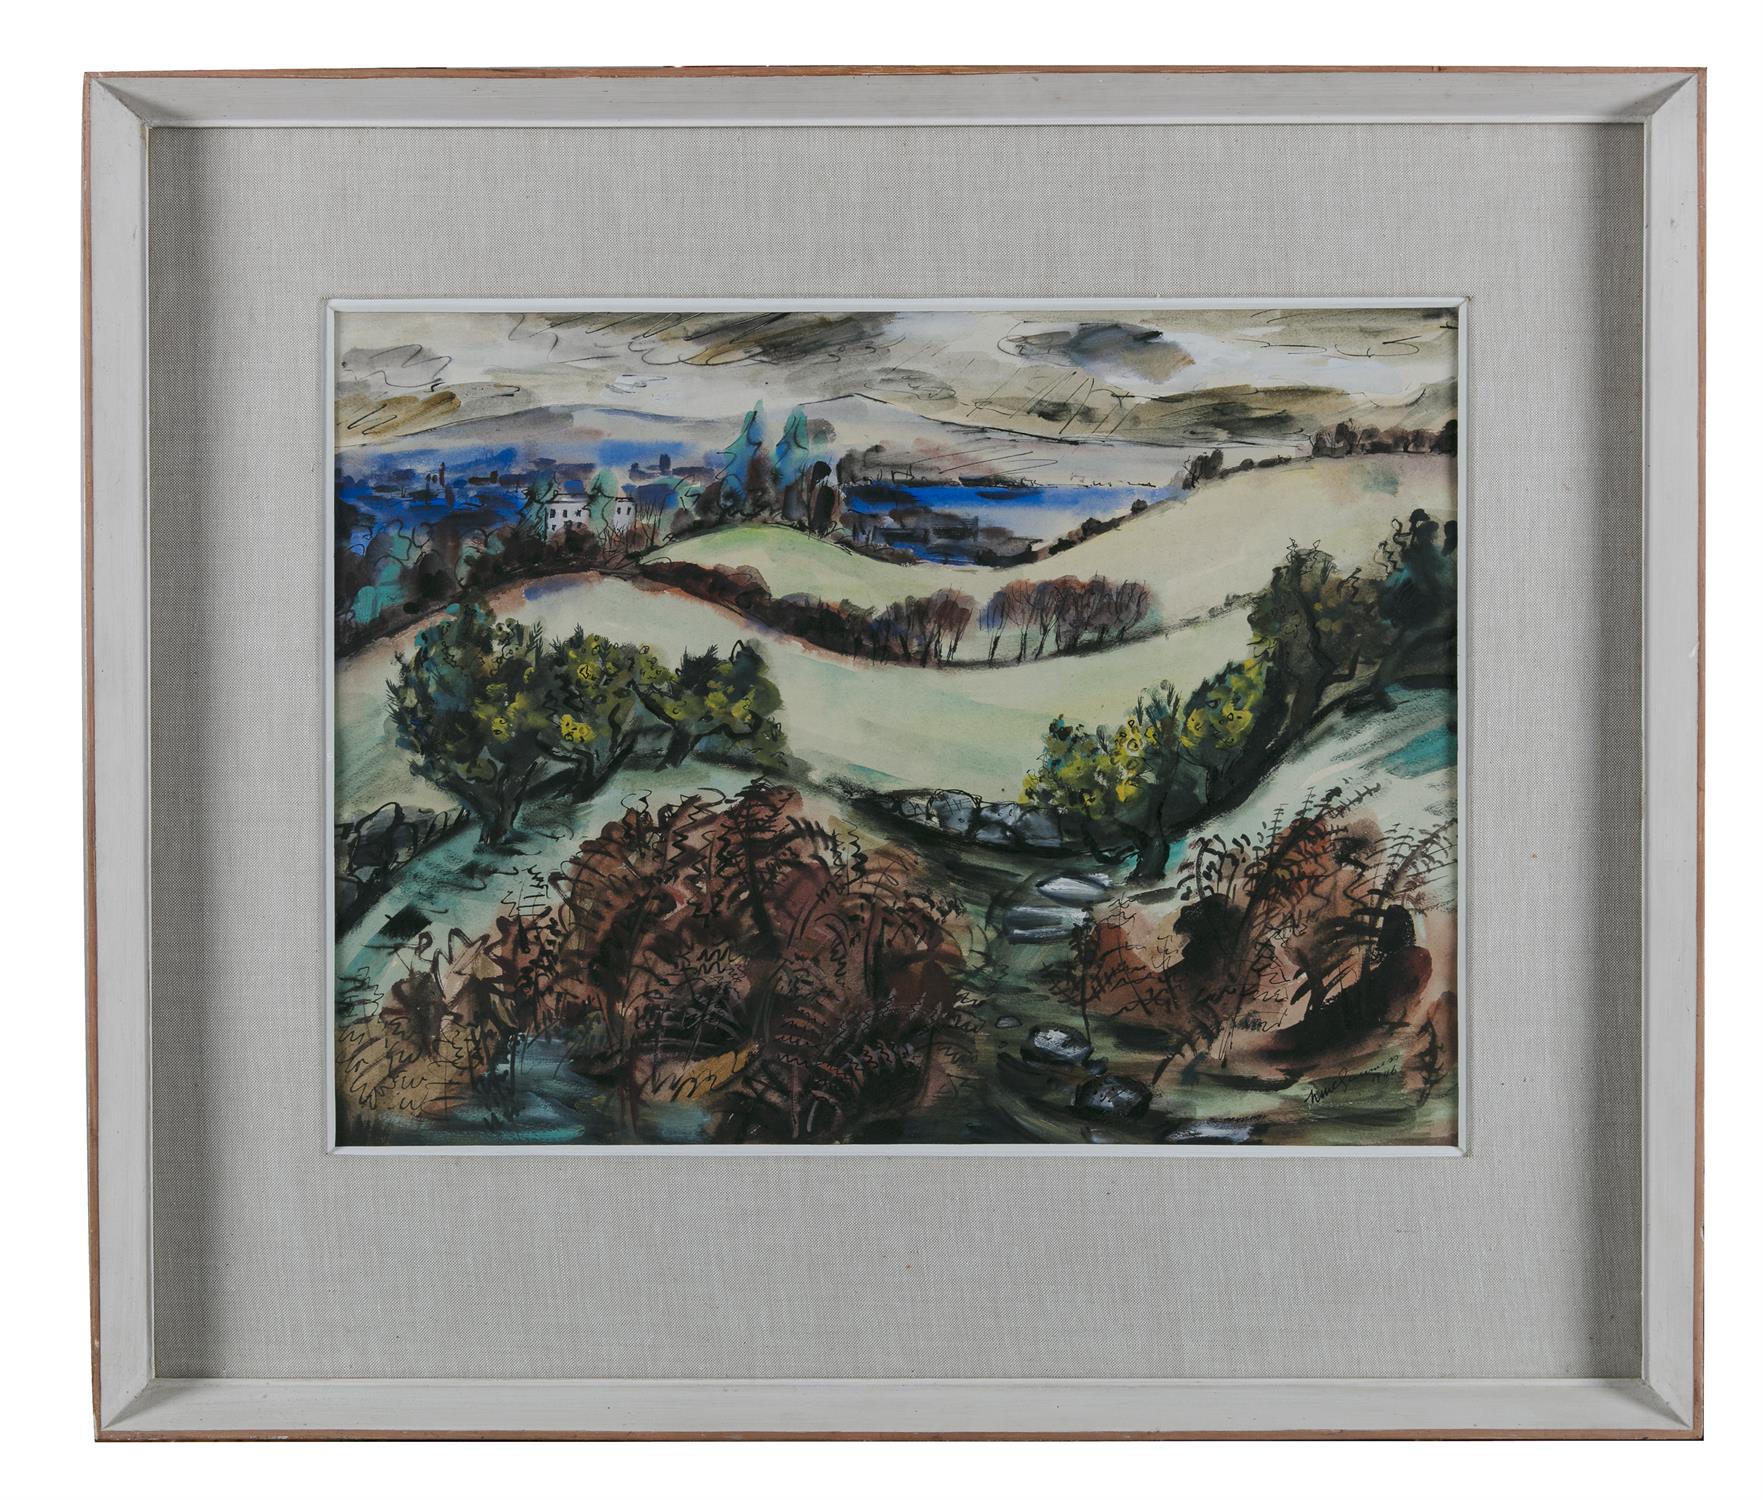 Norah McGuinness HRHA (1901-1980) Country Landscape Watercolour, 41 x 55cm (16¼ x 21¾'') Signed - Image 2 of 4